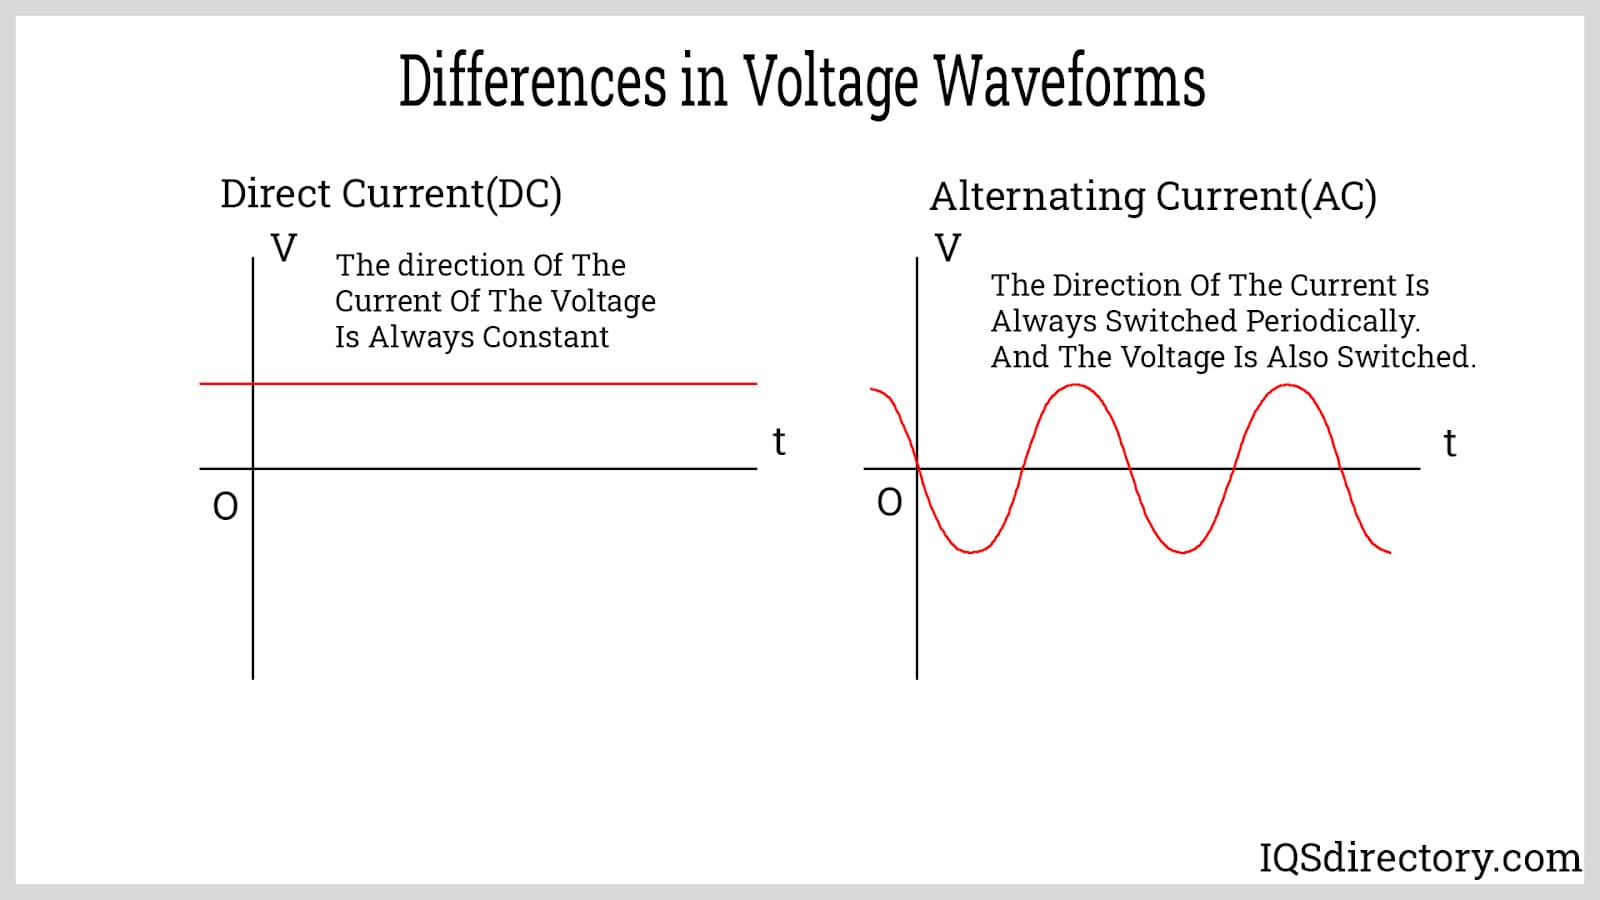 Differences in Voltage Waveforms